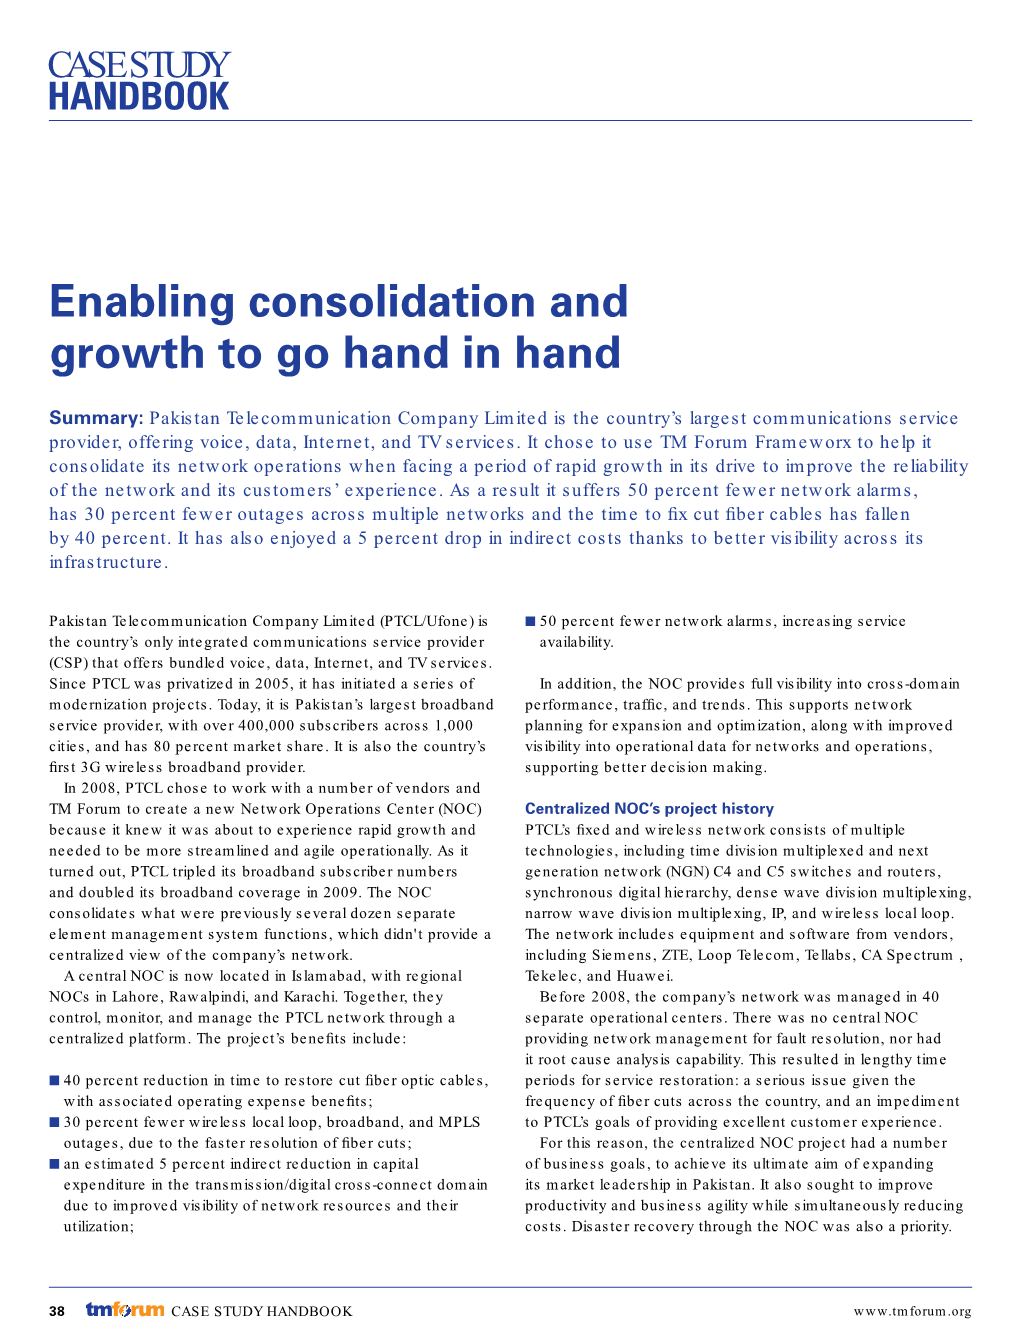 Enabling Consolidation and Growth to Go Hand in Hand